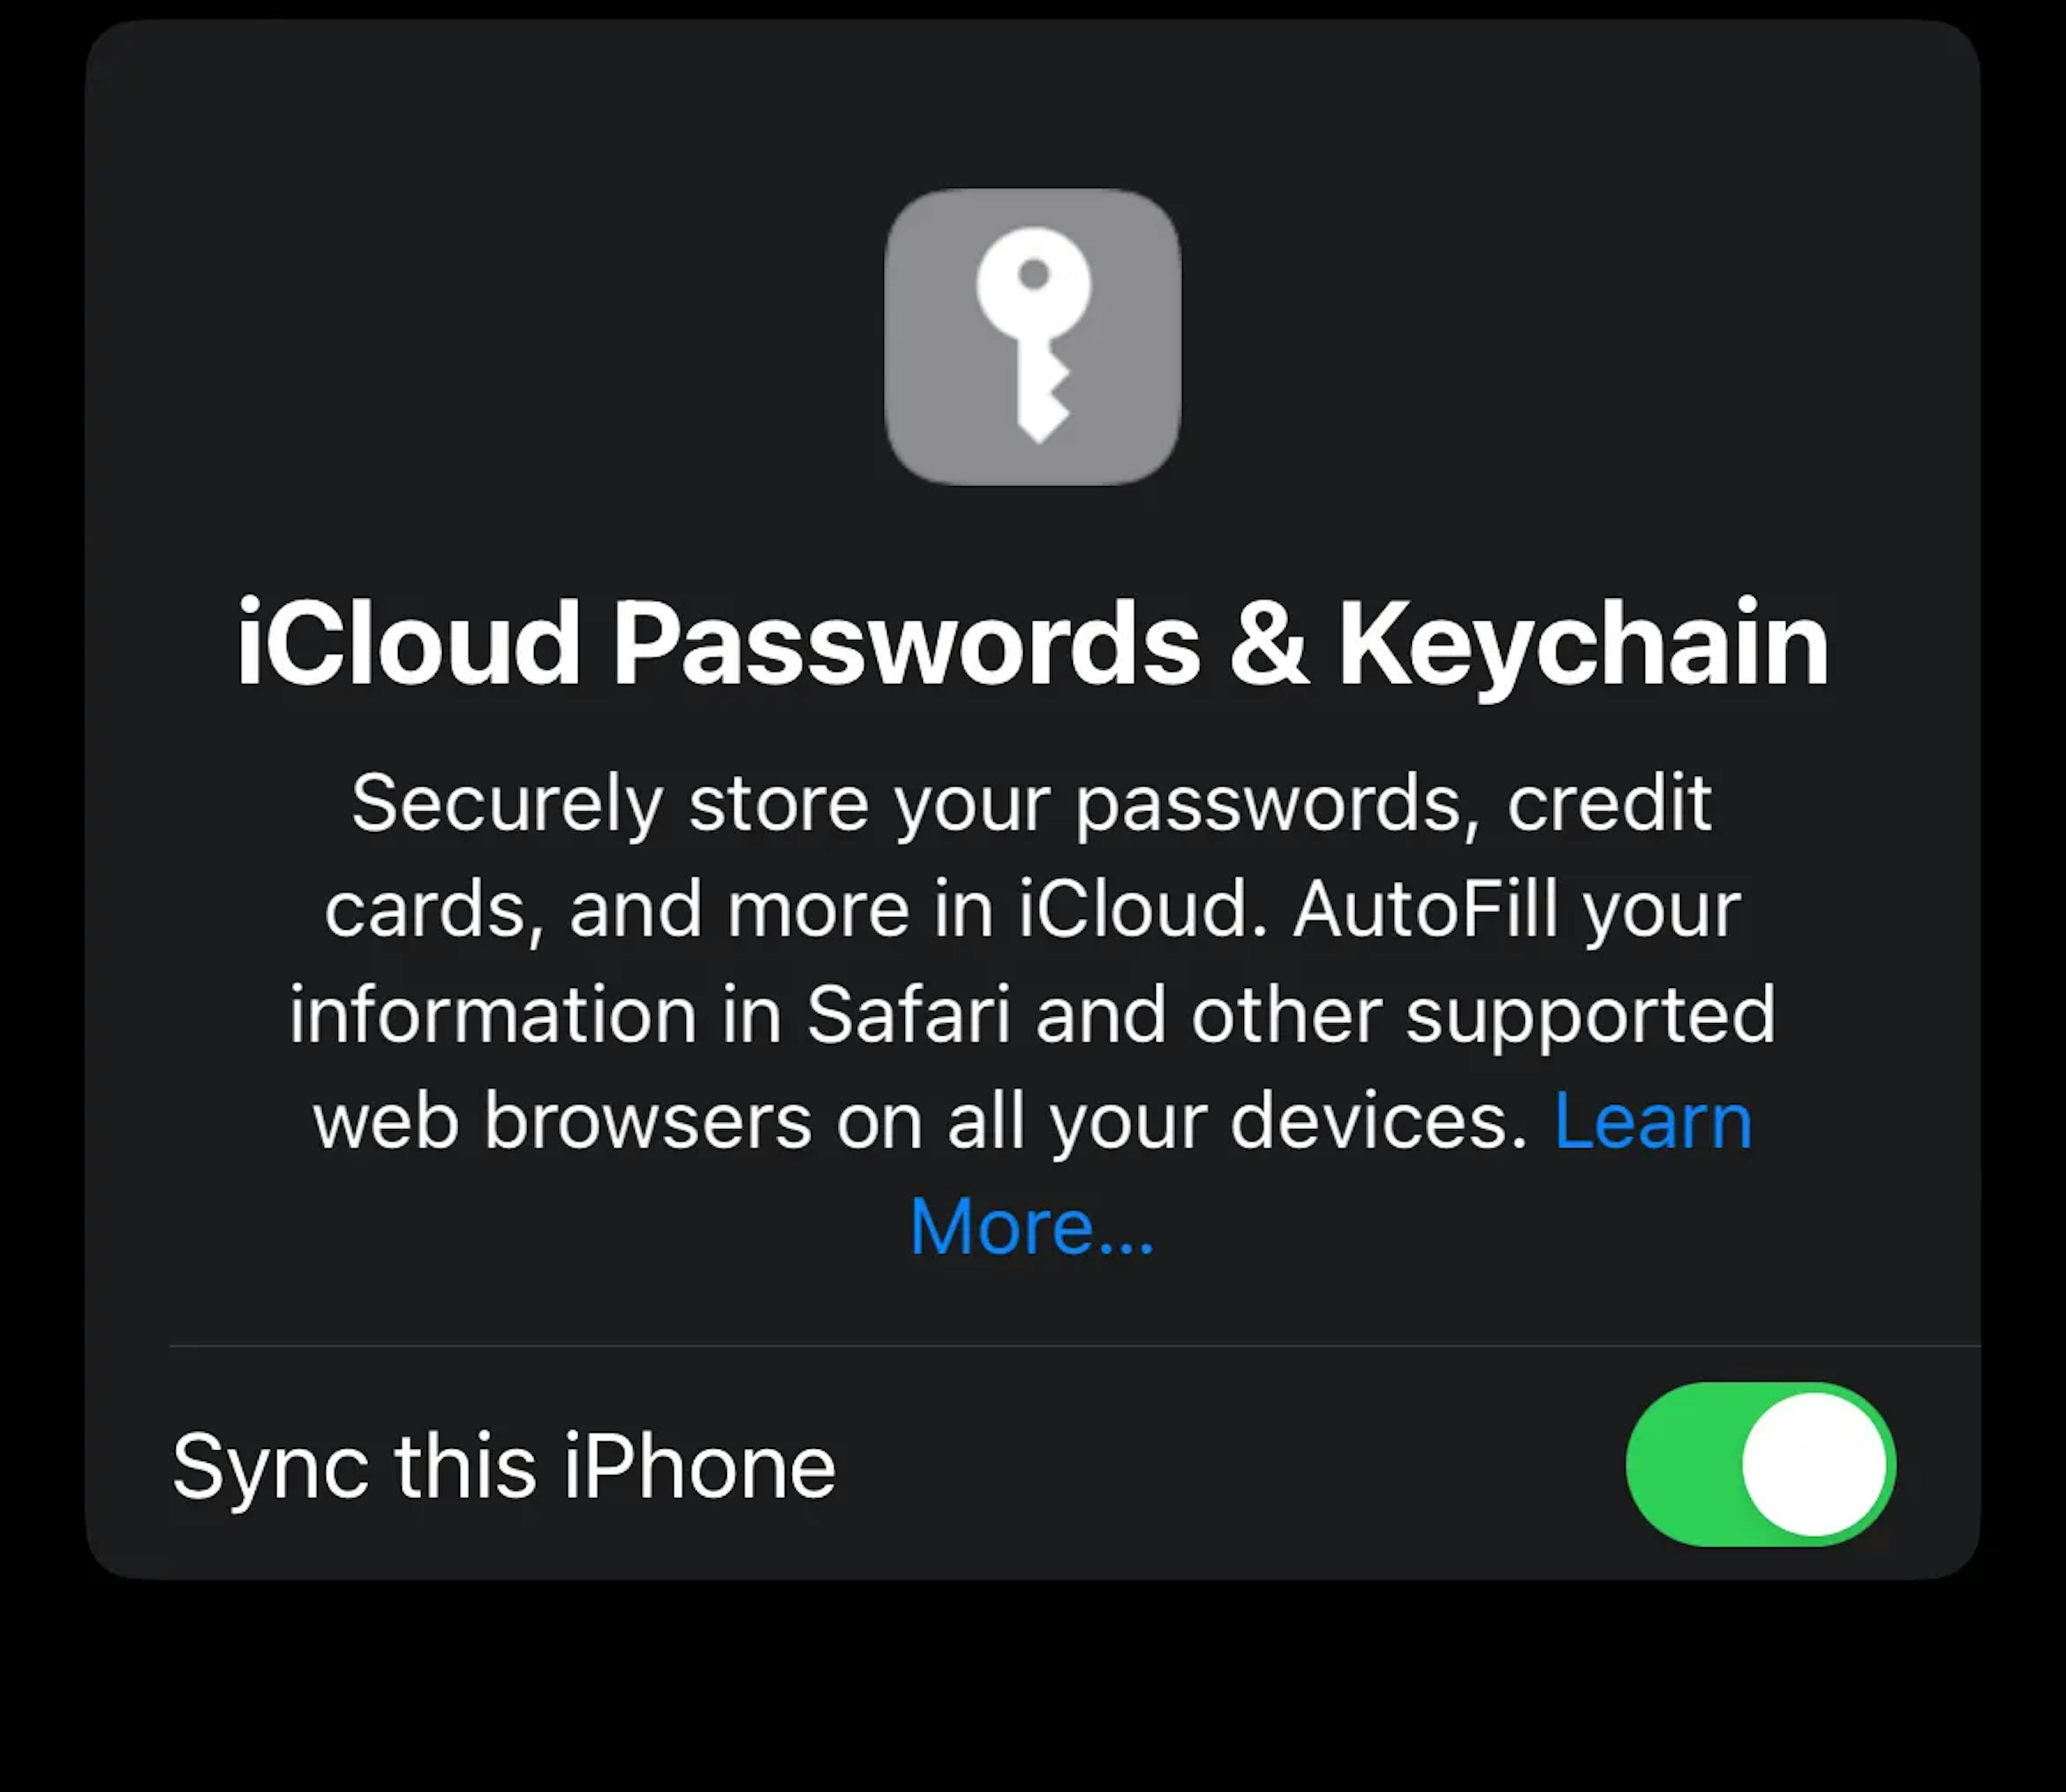 iPhone password manager